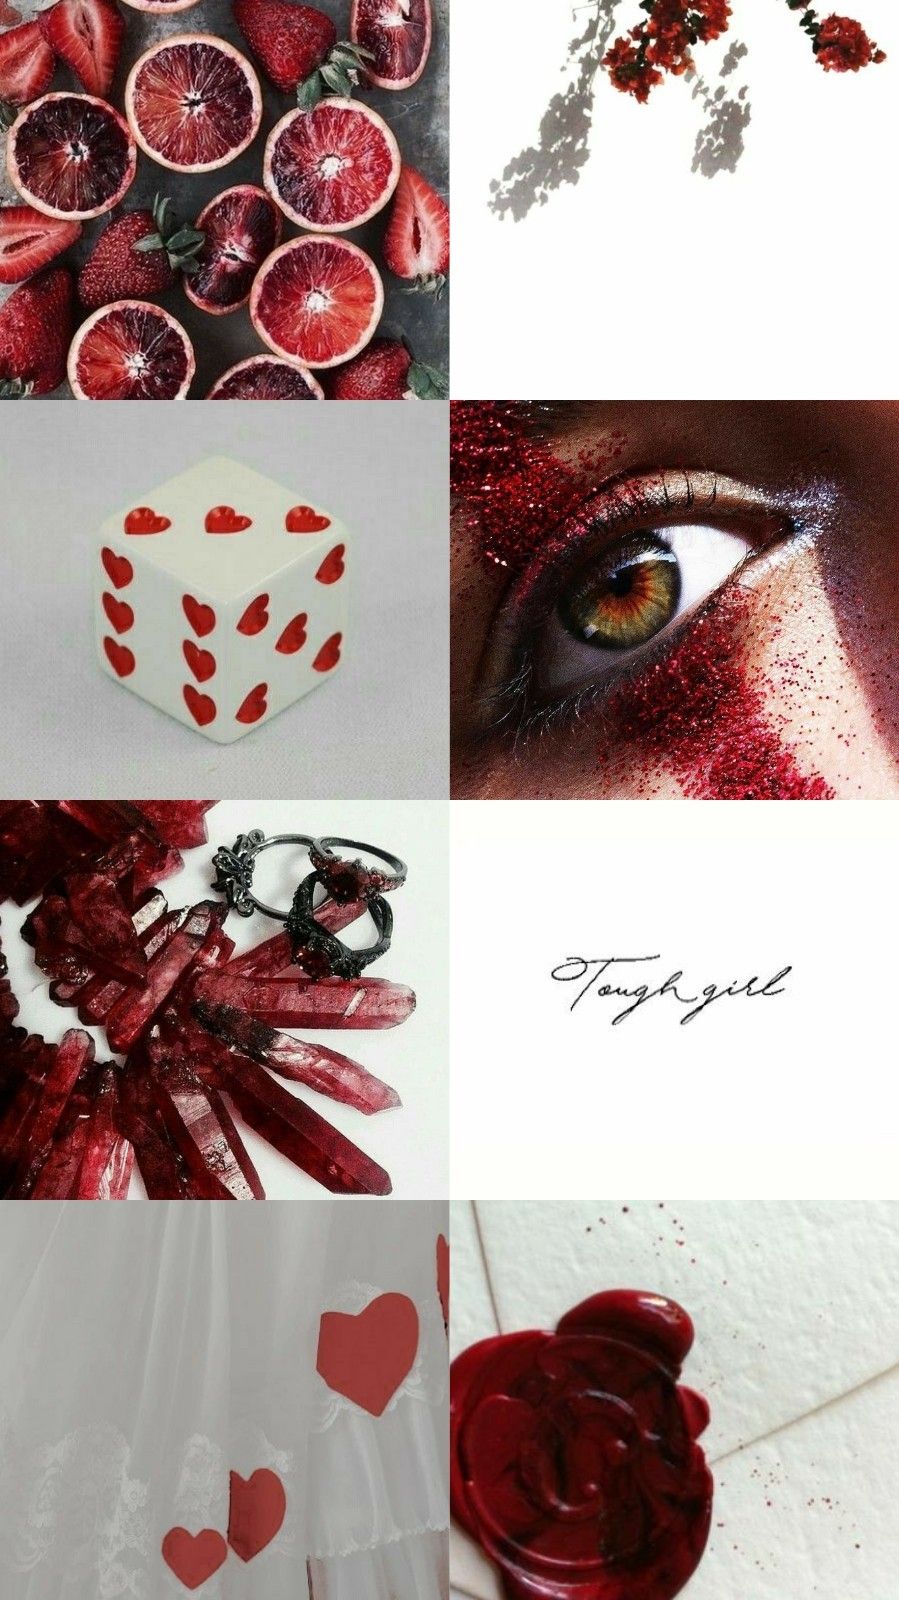 Red aesthetic, red eyes, red roses, red dice, red fruit, red blood - Aries